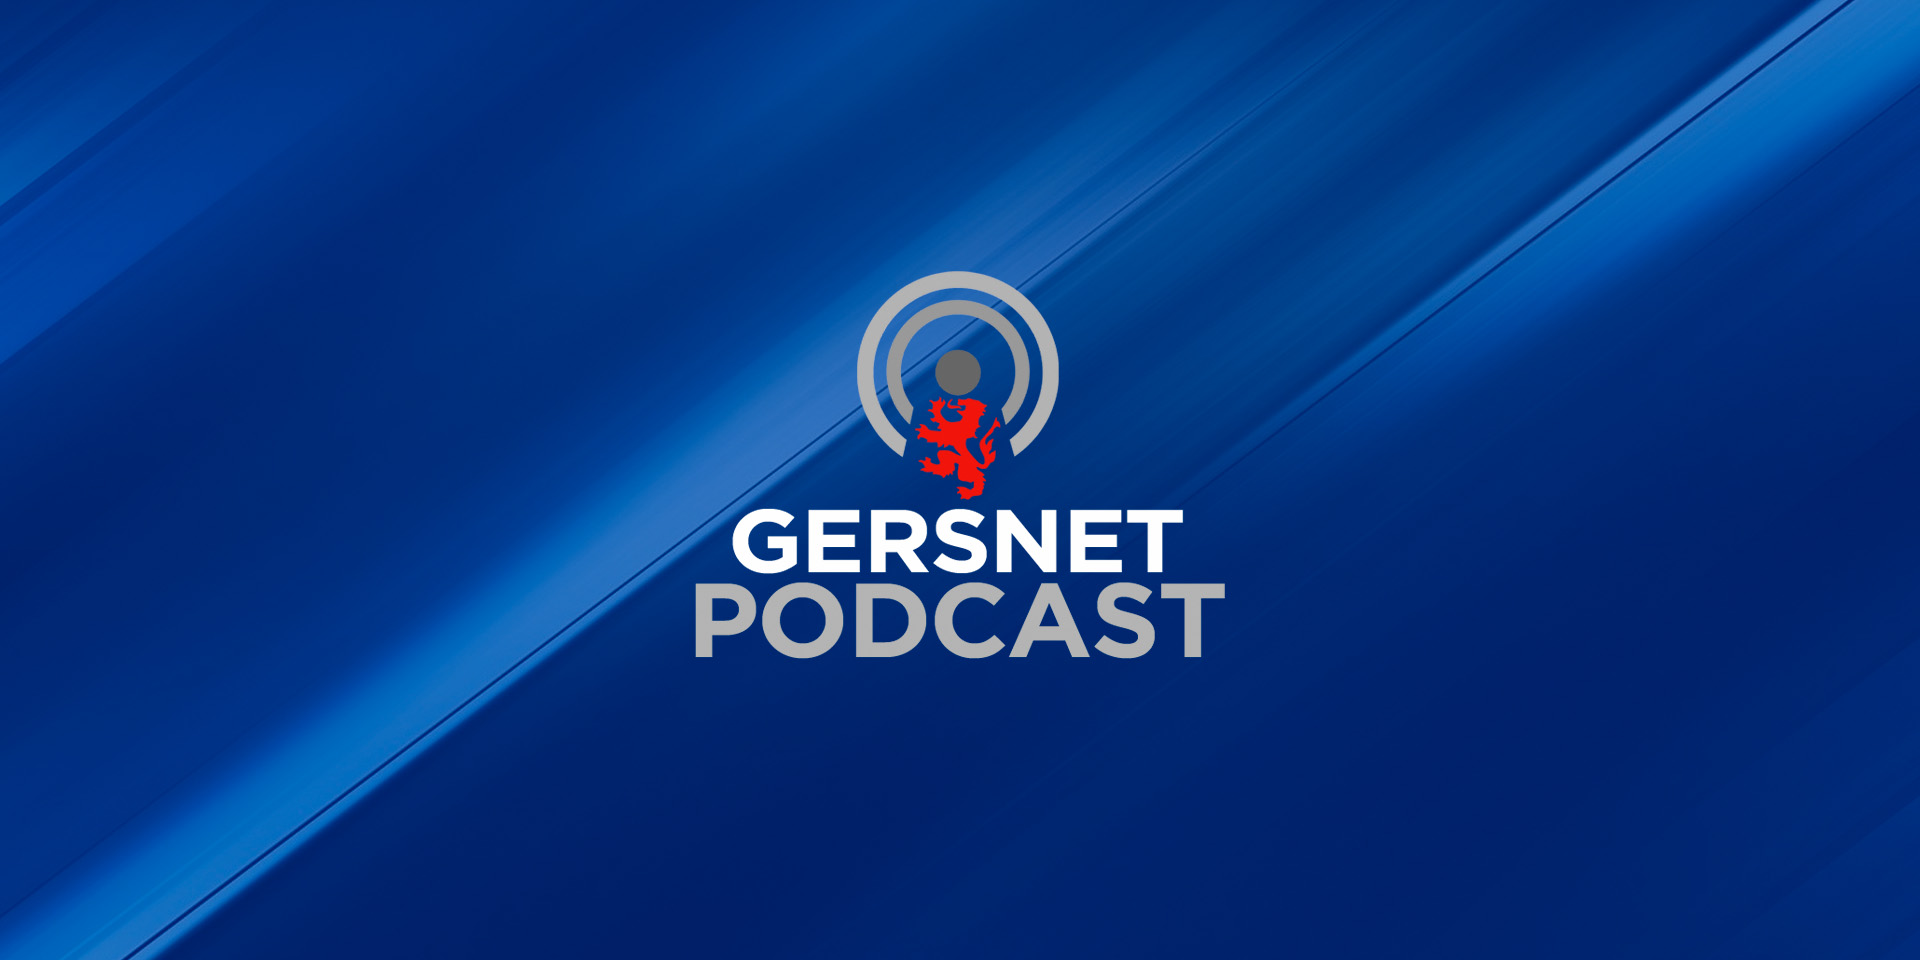 Gersnet Podcast 314 - A Canter in the Cup